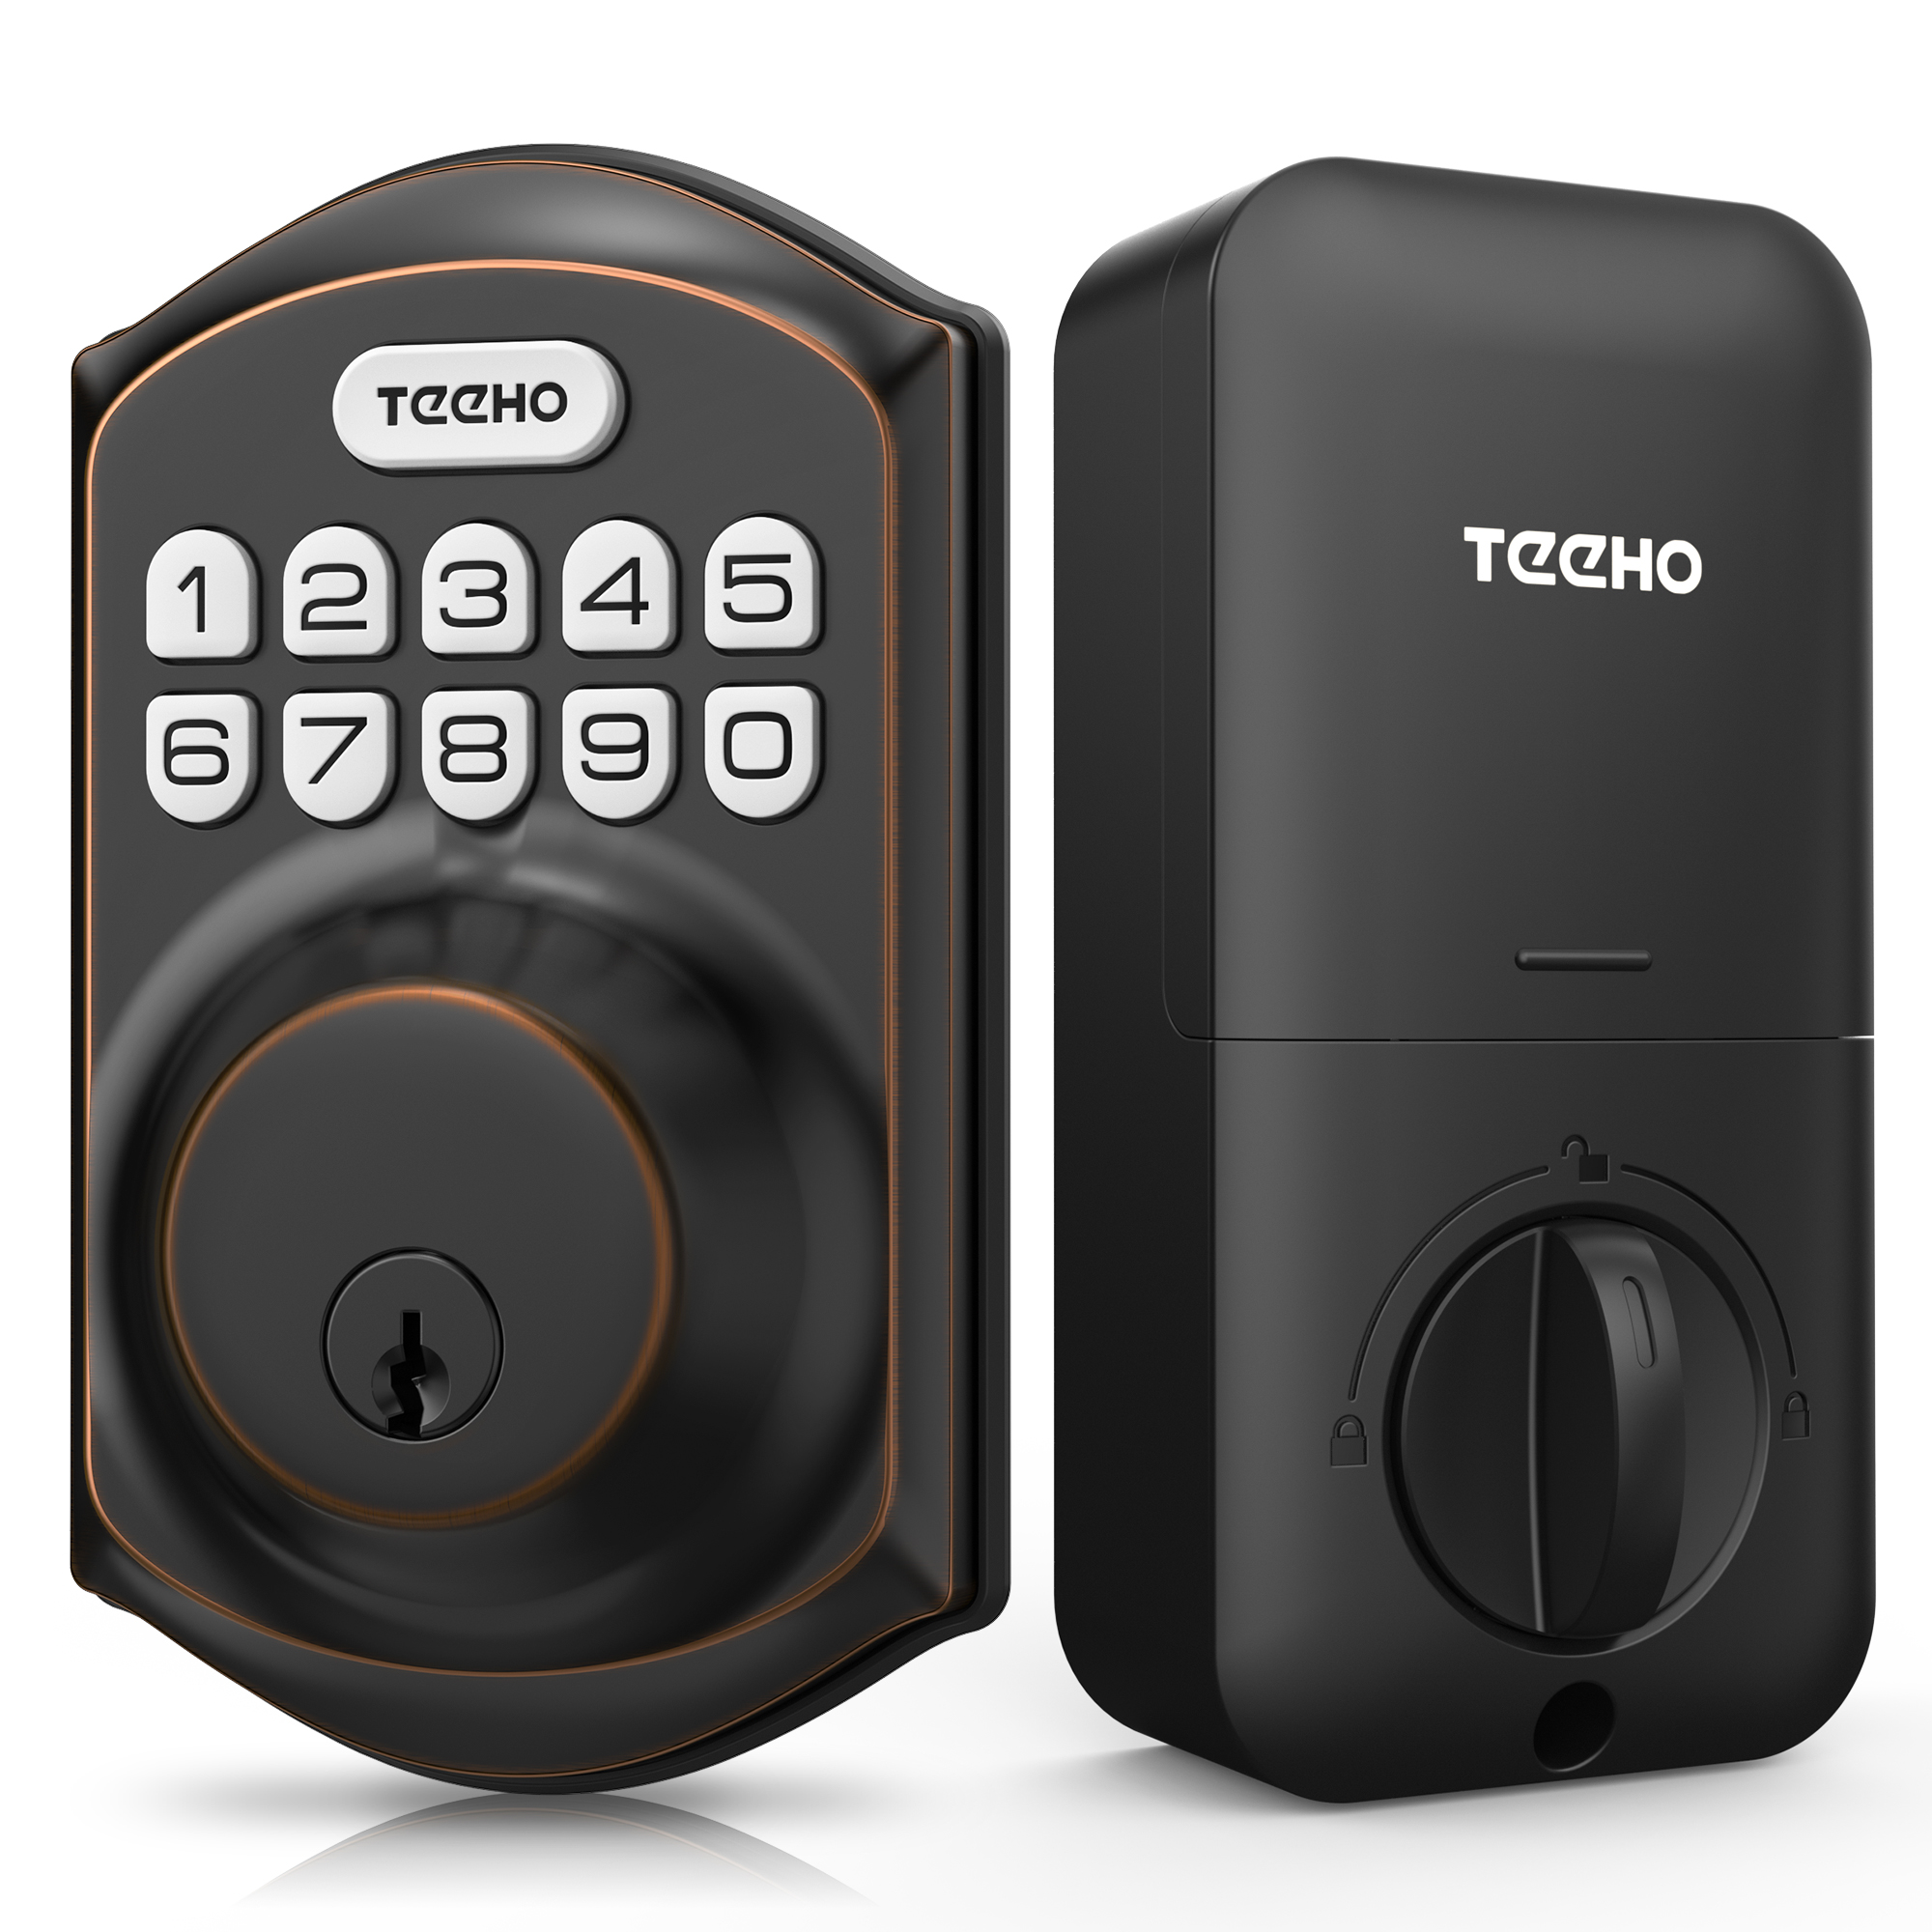 TEEHO Keyless Entry Door Lock Keypad Electronic Smart Deadbolt for Front Door Home in Oil Rubbed Bronze Finish - image 1 of 13